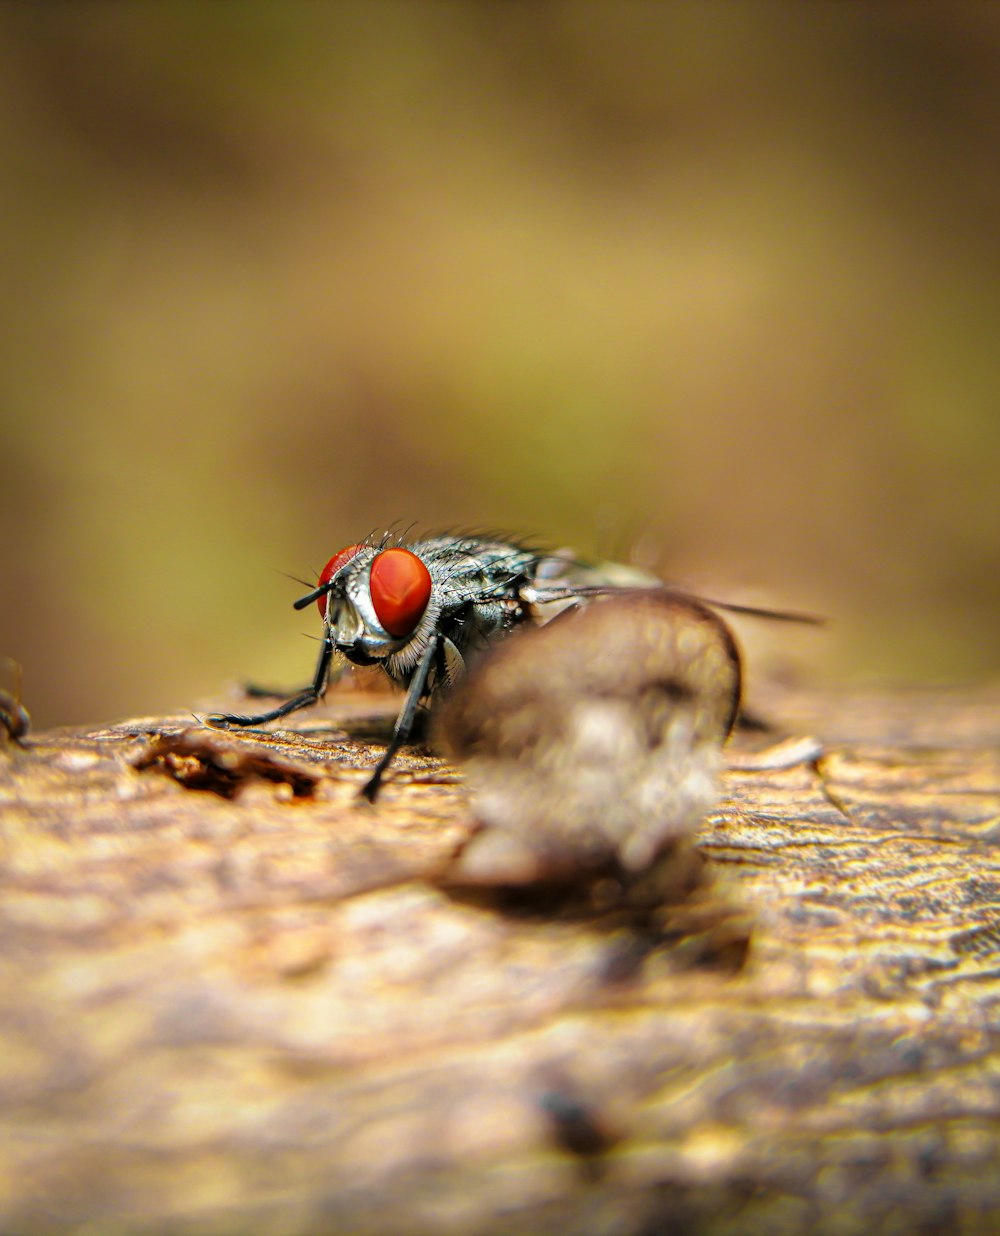 a close up of a fly on a piece of wood